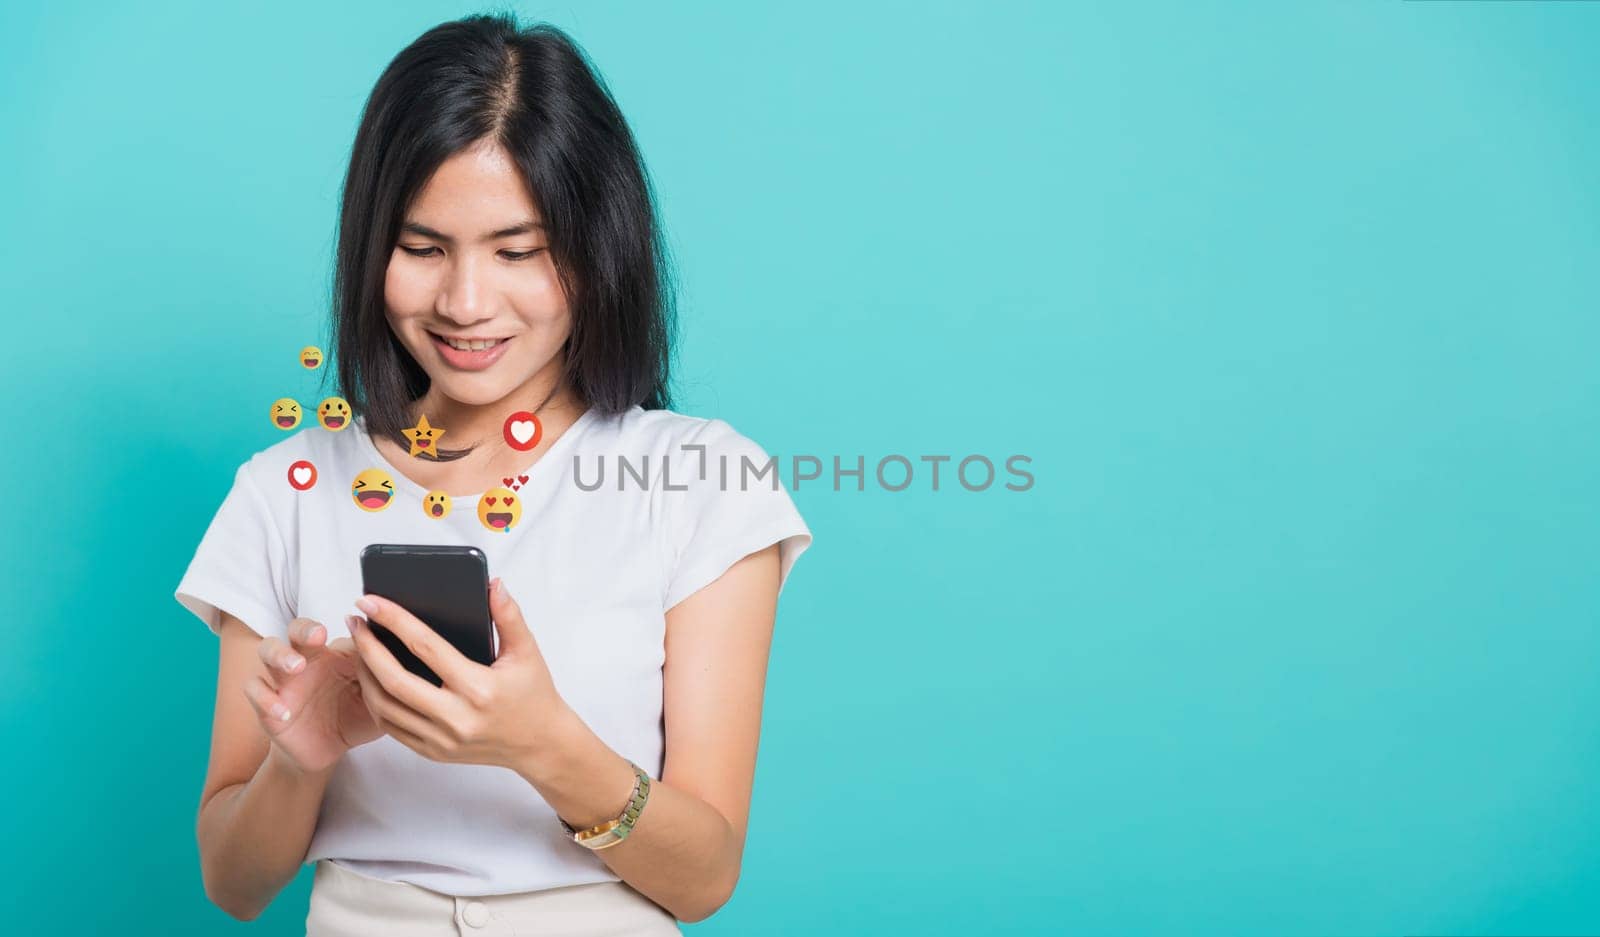 Social media interaction concept with notification icons on mobile phone, person holding device, online communication and networking with friends isolated on blue background